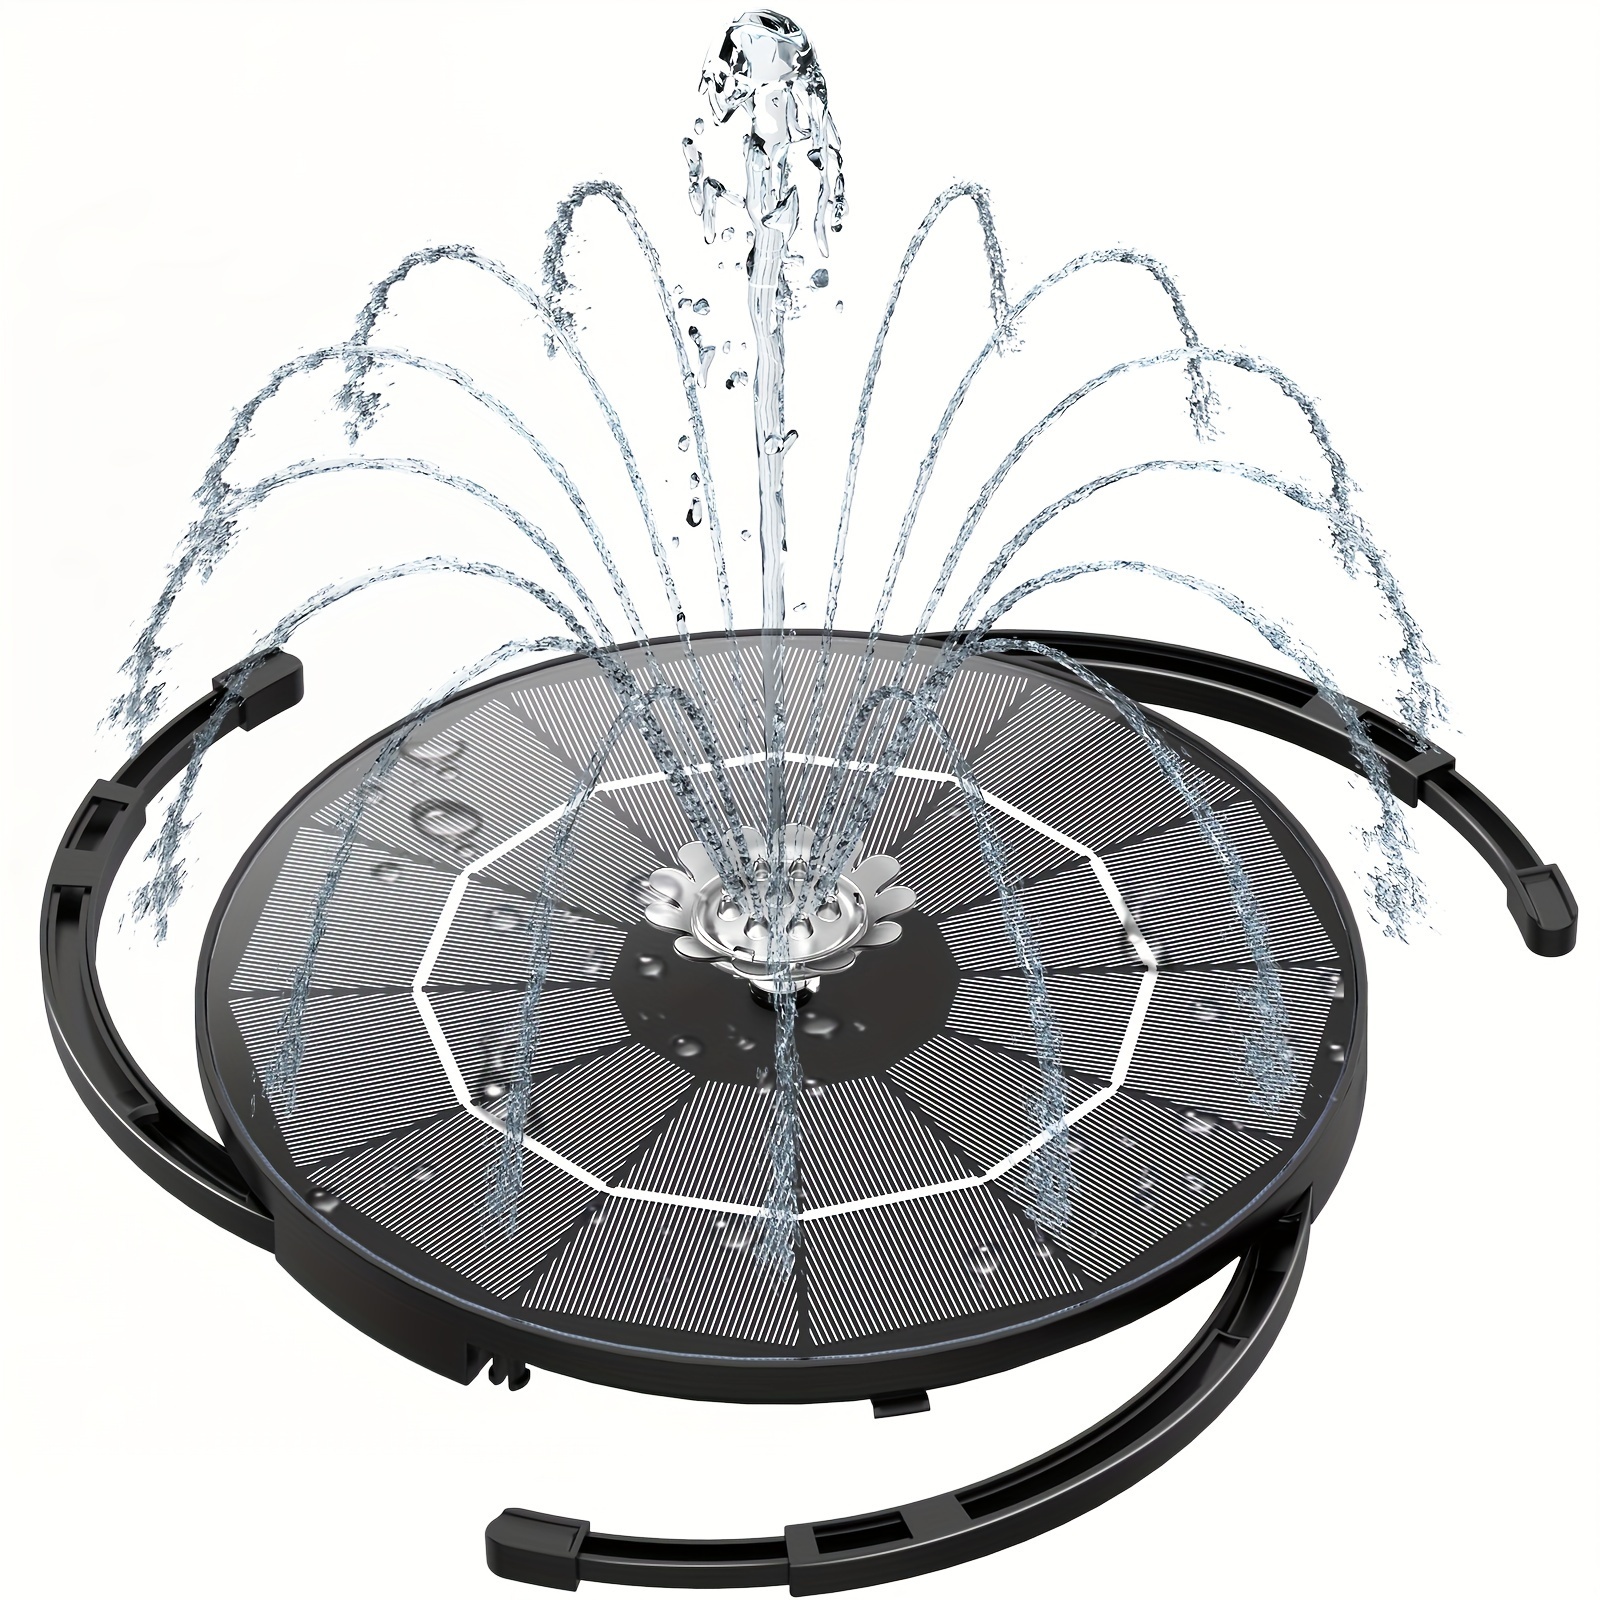 

1pc Plastic Solar-powered Floating Fountain Pump, Solar Water Fountain For Bird Bath, Garden, Pond, Pool, Outdoor, And Backyard, Portable Stand-alone Solar Panel Pump